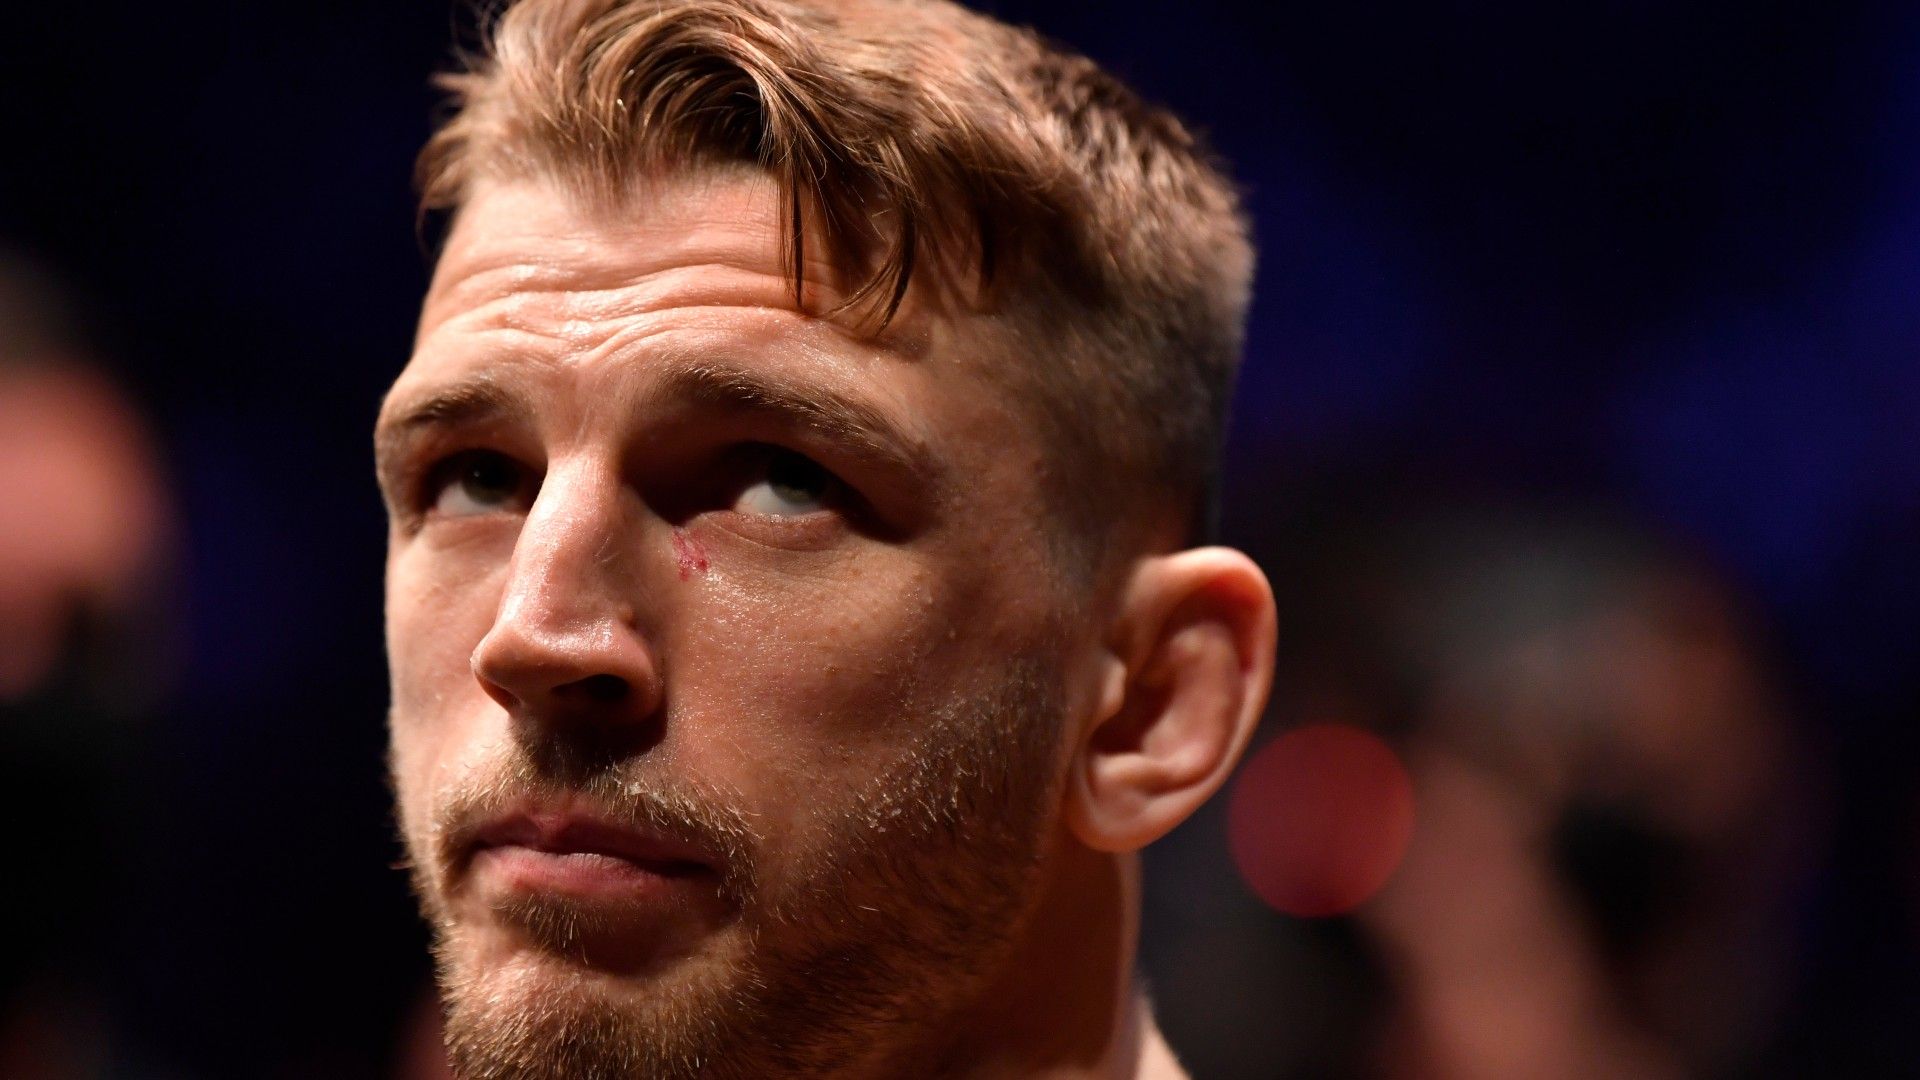 Kiwi Dan Hooker wins 'wild' visa fight after trip to Vegas for UFC 266 was blocked by government